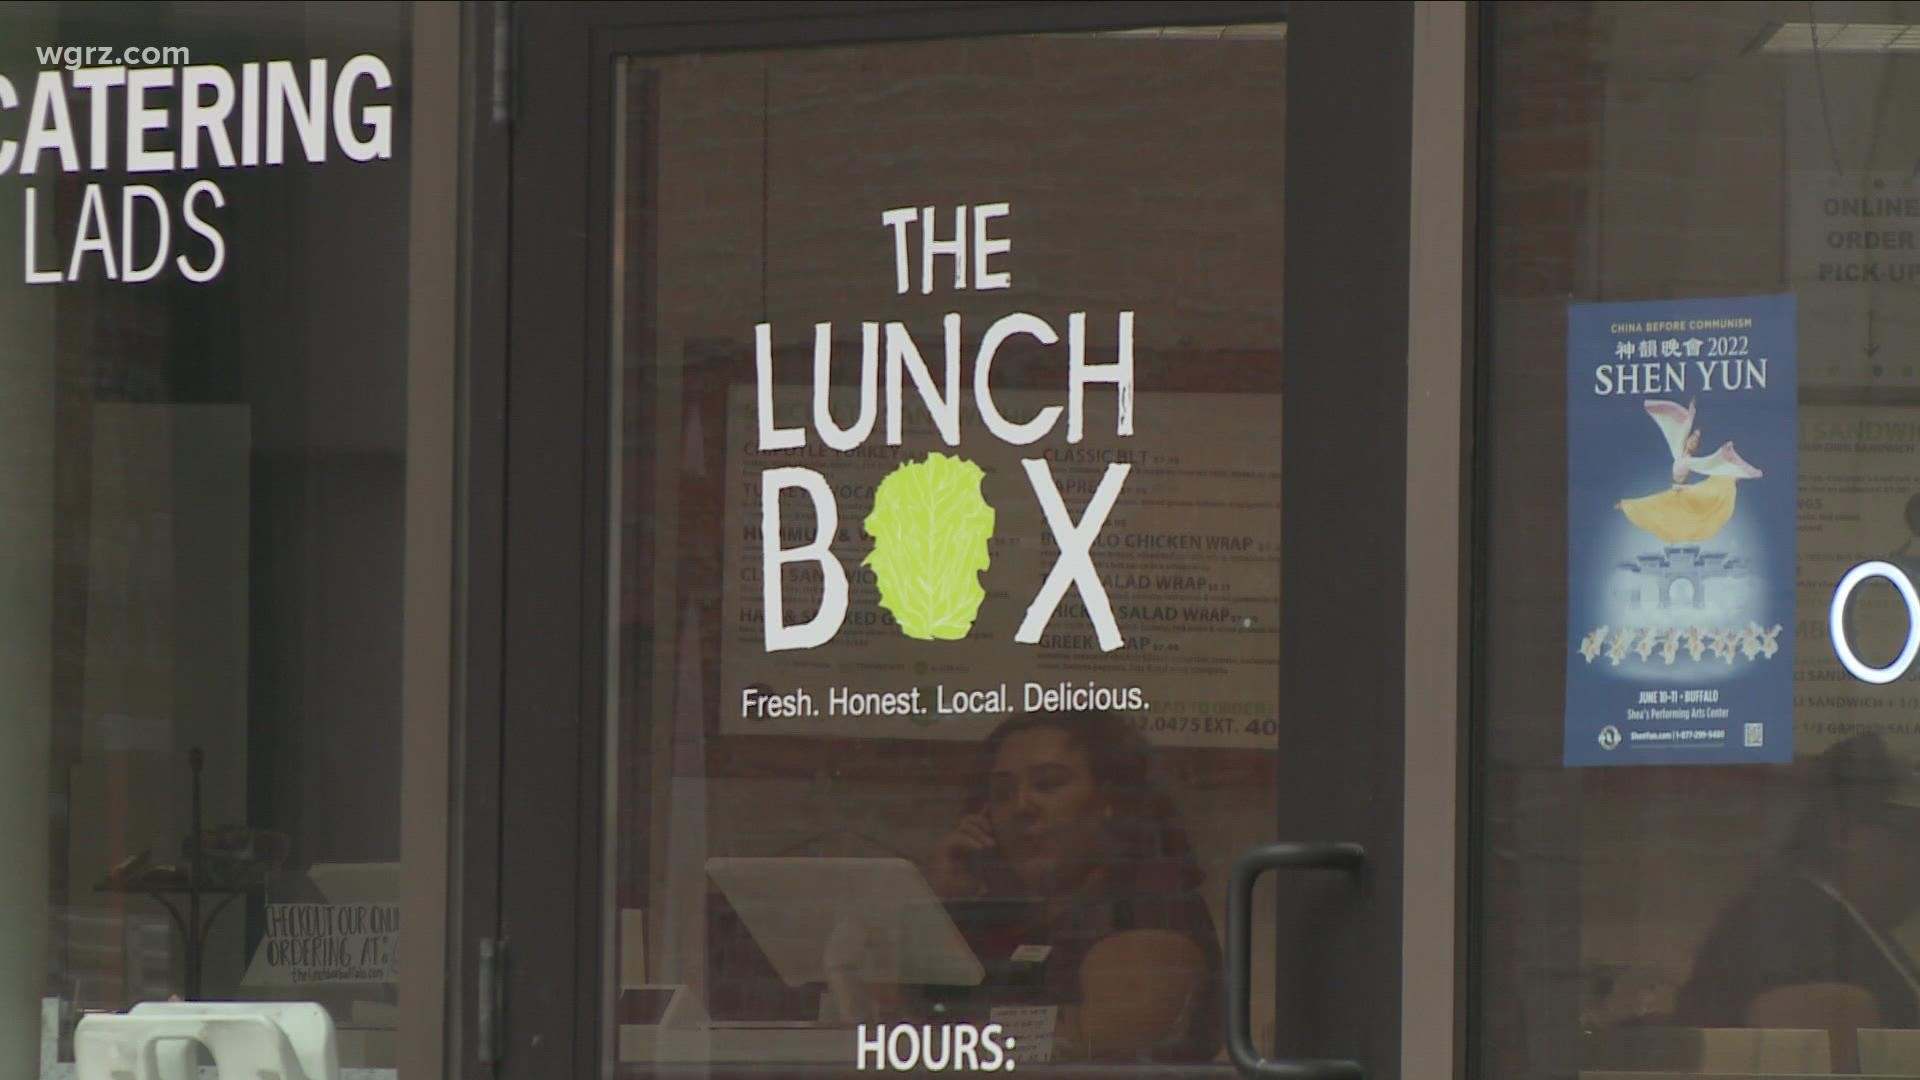 The Lunchbox adds outdoor dining and music